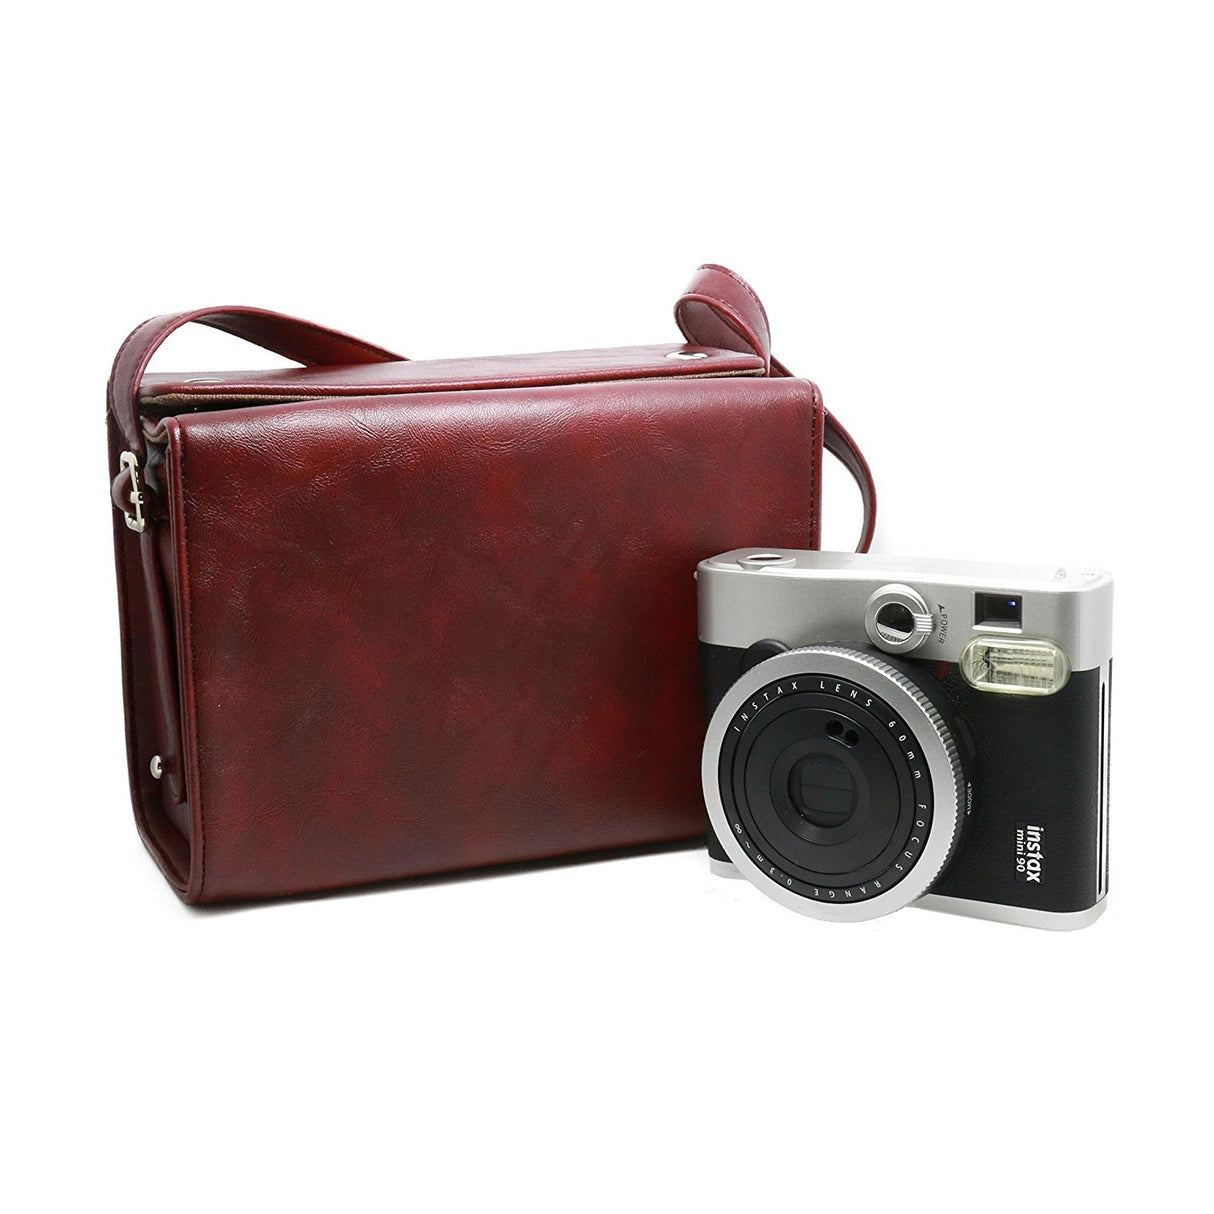 CAIUL Travel Carrying Camera Case Bag for Fujinfilm Mini 8 50s 90 7s 25/ Polaroid PIC300P/ Polaroid Z2300(PU Leather), Red Brown